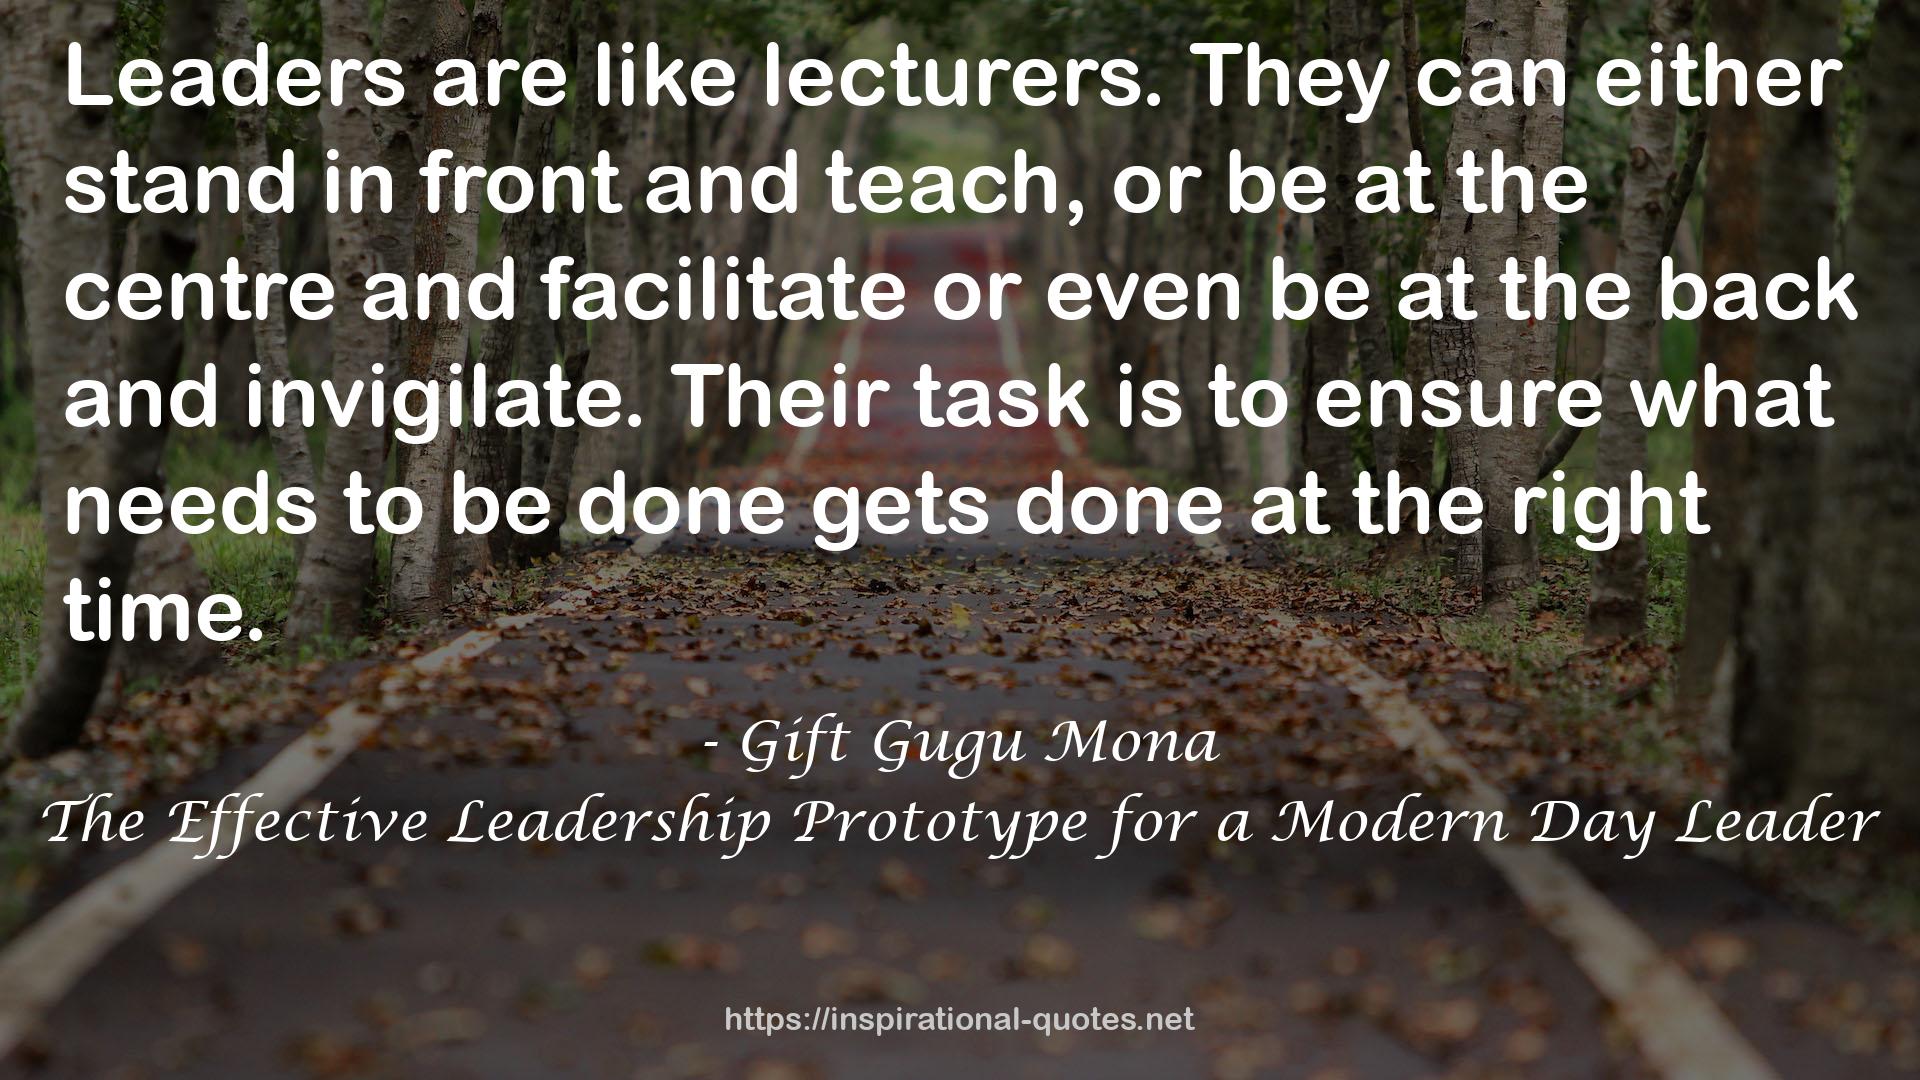 The Effective Leadership Prototype for a Modern Day Leader QUOTES